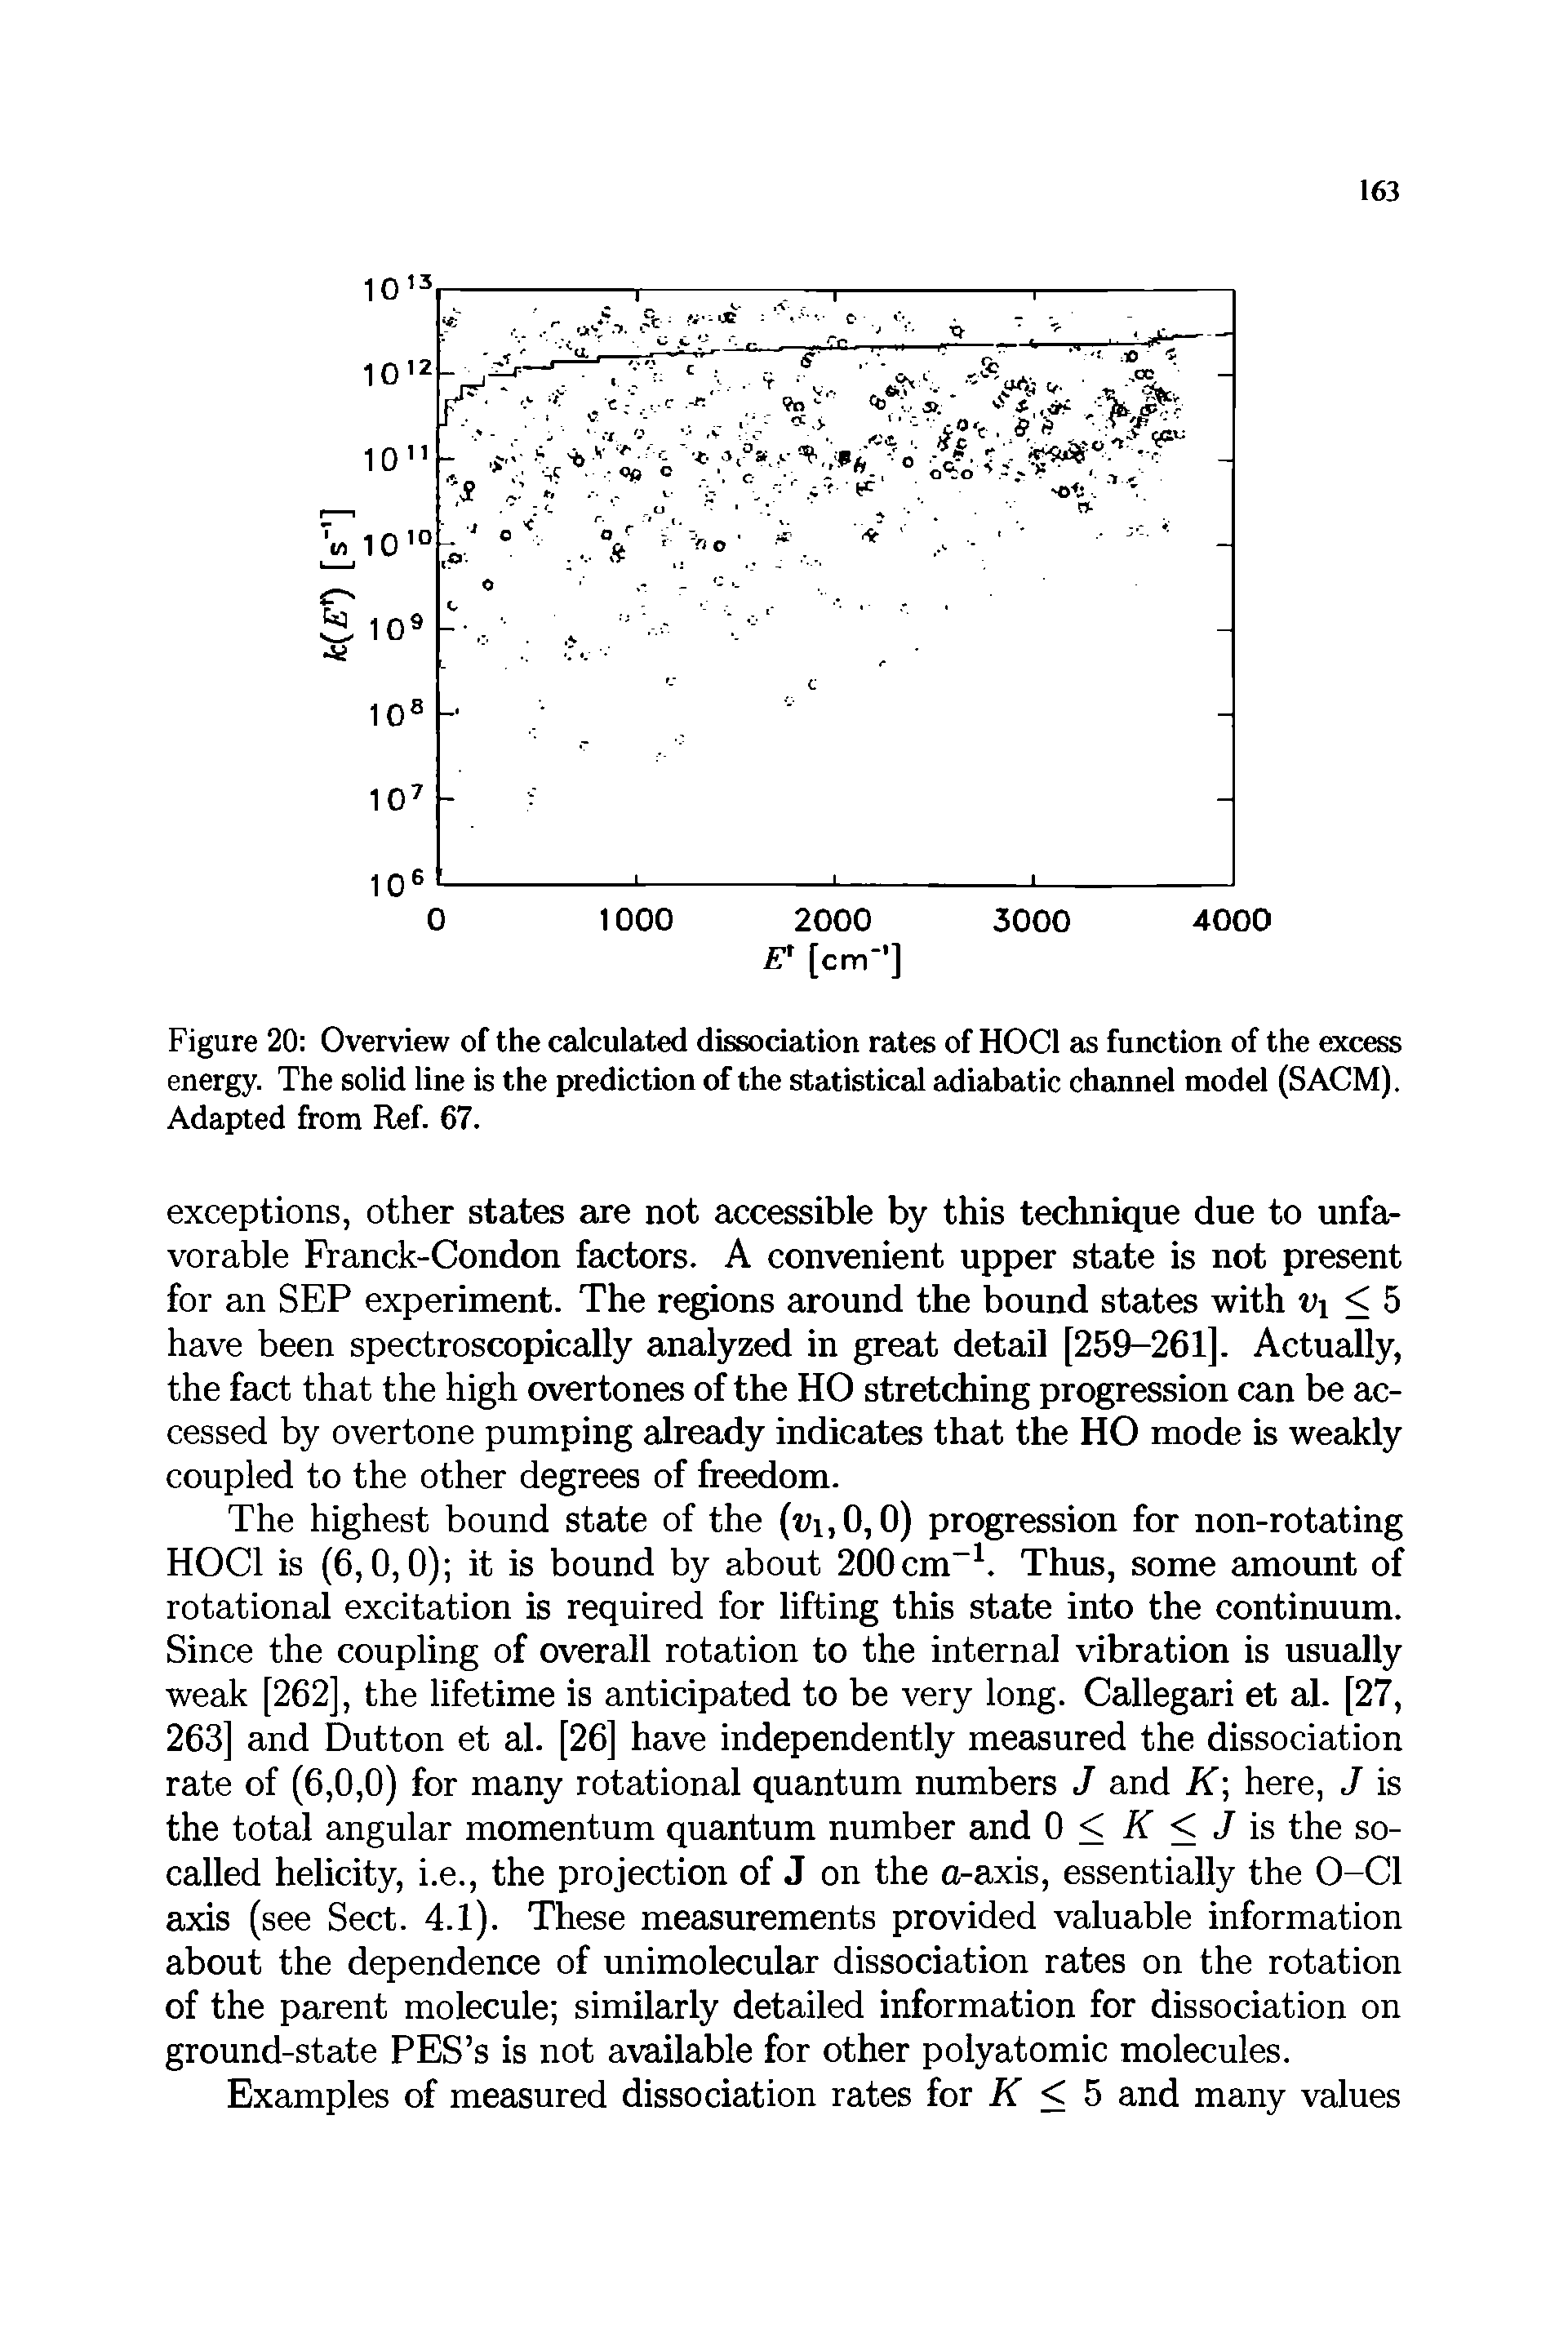 Figure 20 Overview of the calculated dissociation rates of HOCl as function of the excess energy. The solid line is the prediction of the statistical adiabatic channel model (SACM). Adapted from Ref. 67.